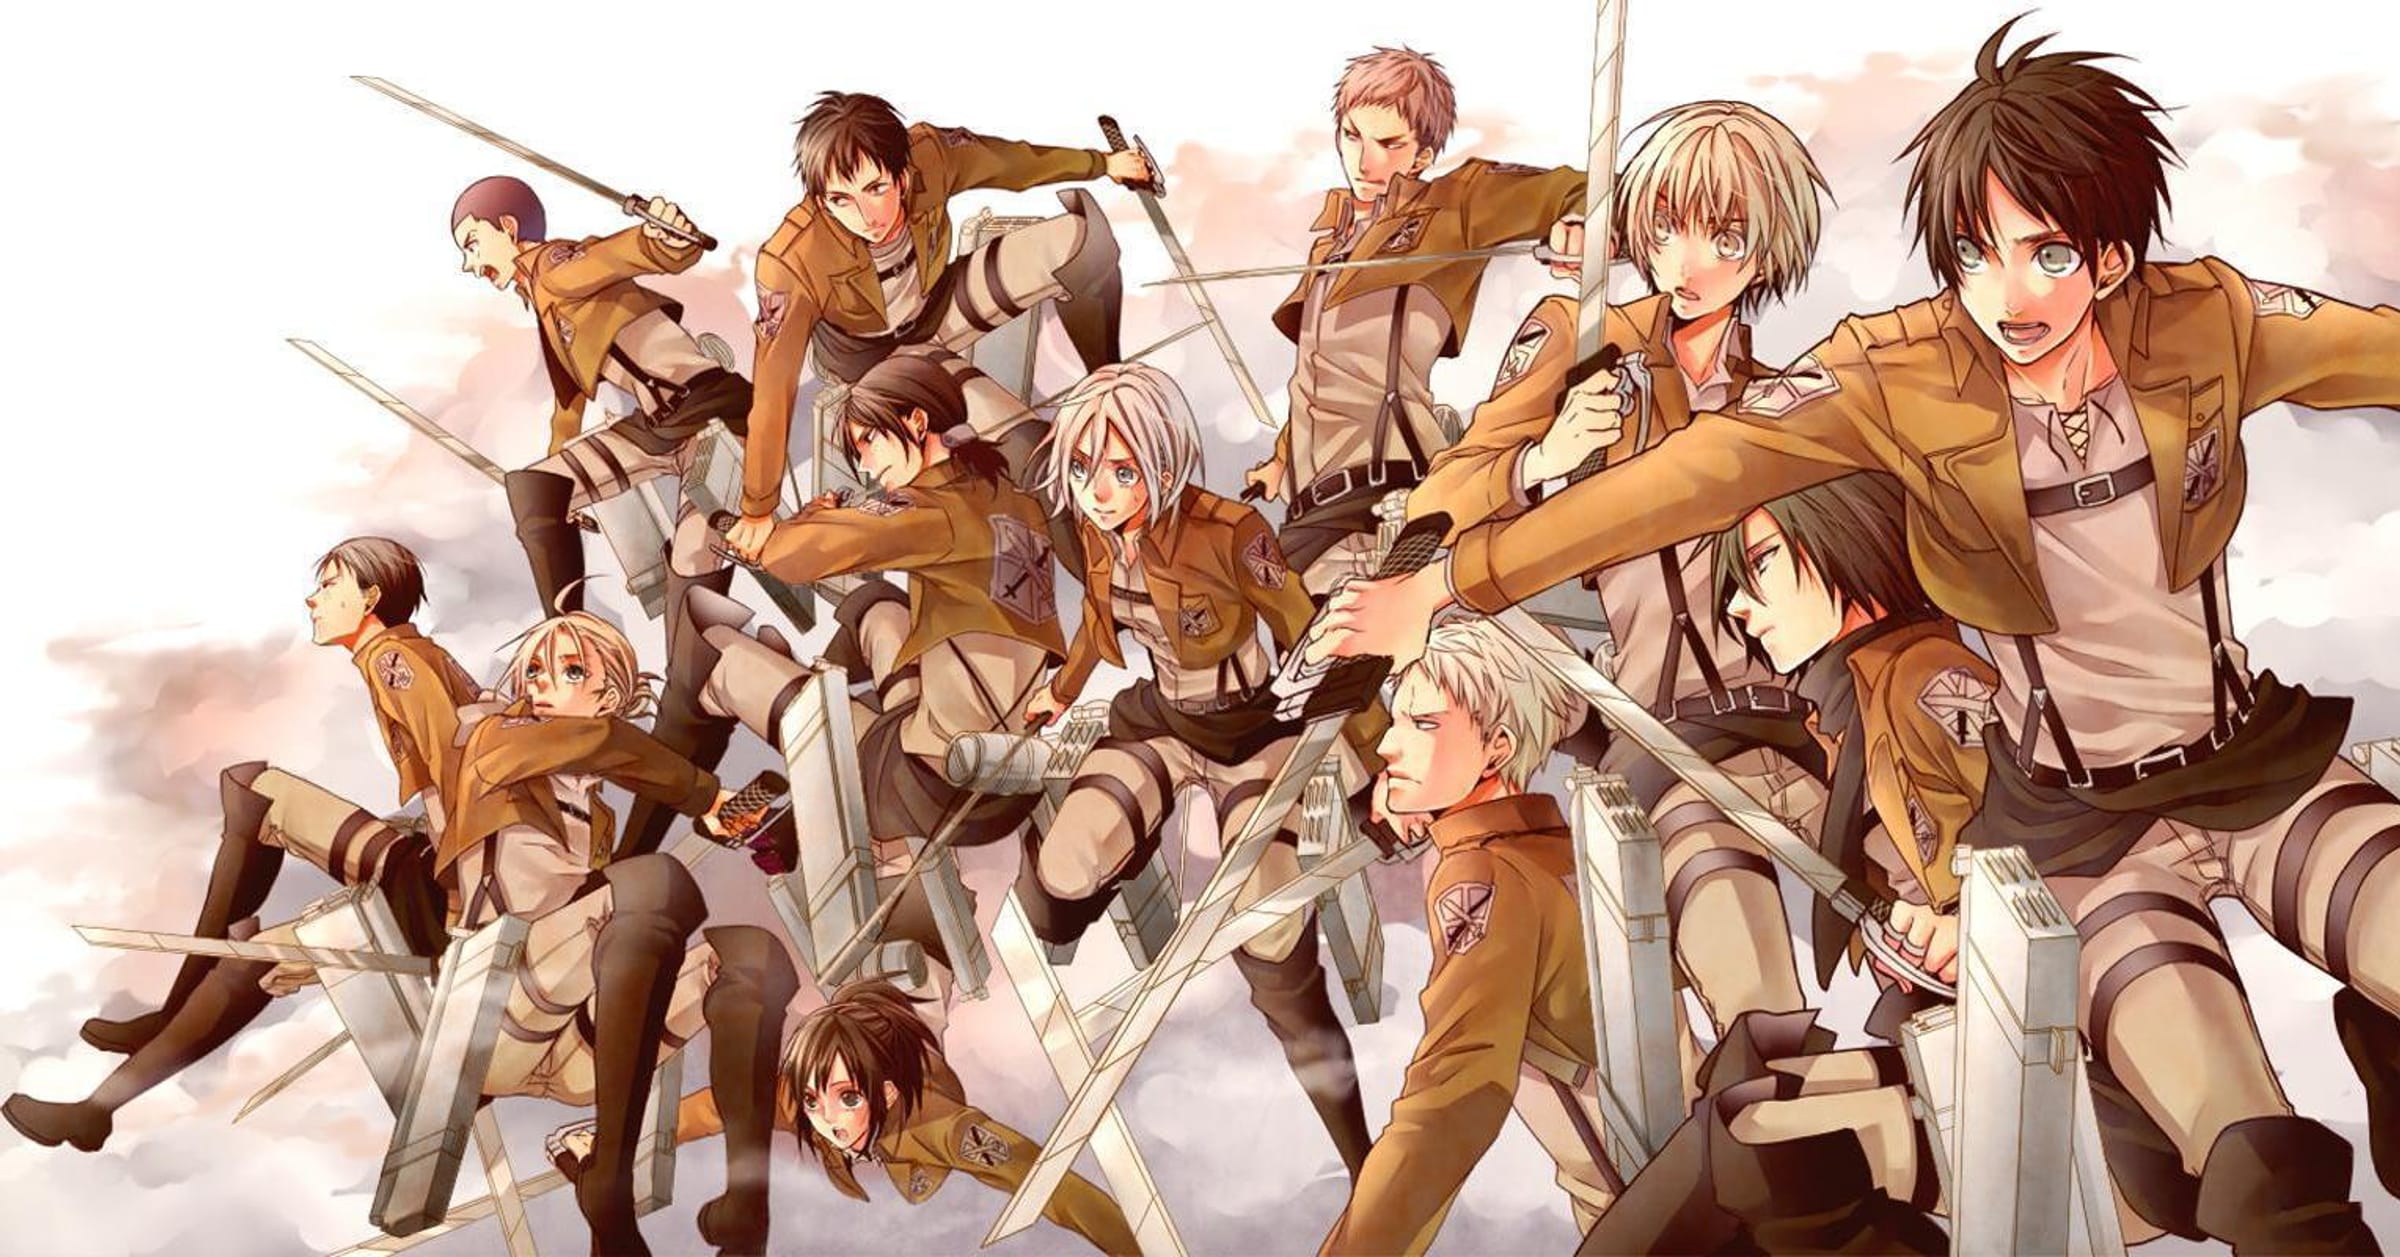 Top 10 Most Successful Attack On Titan Villains, Ranked